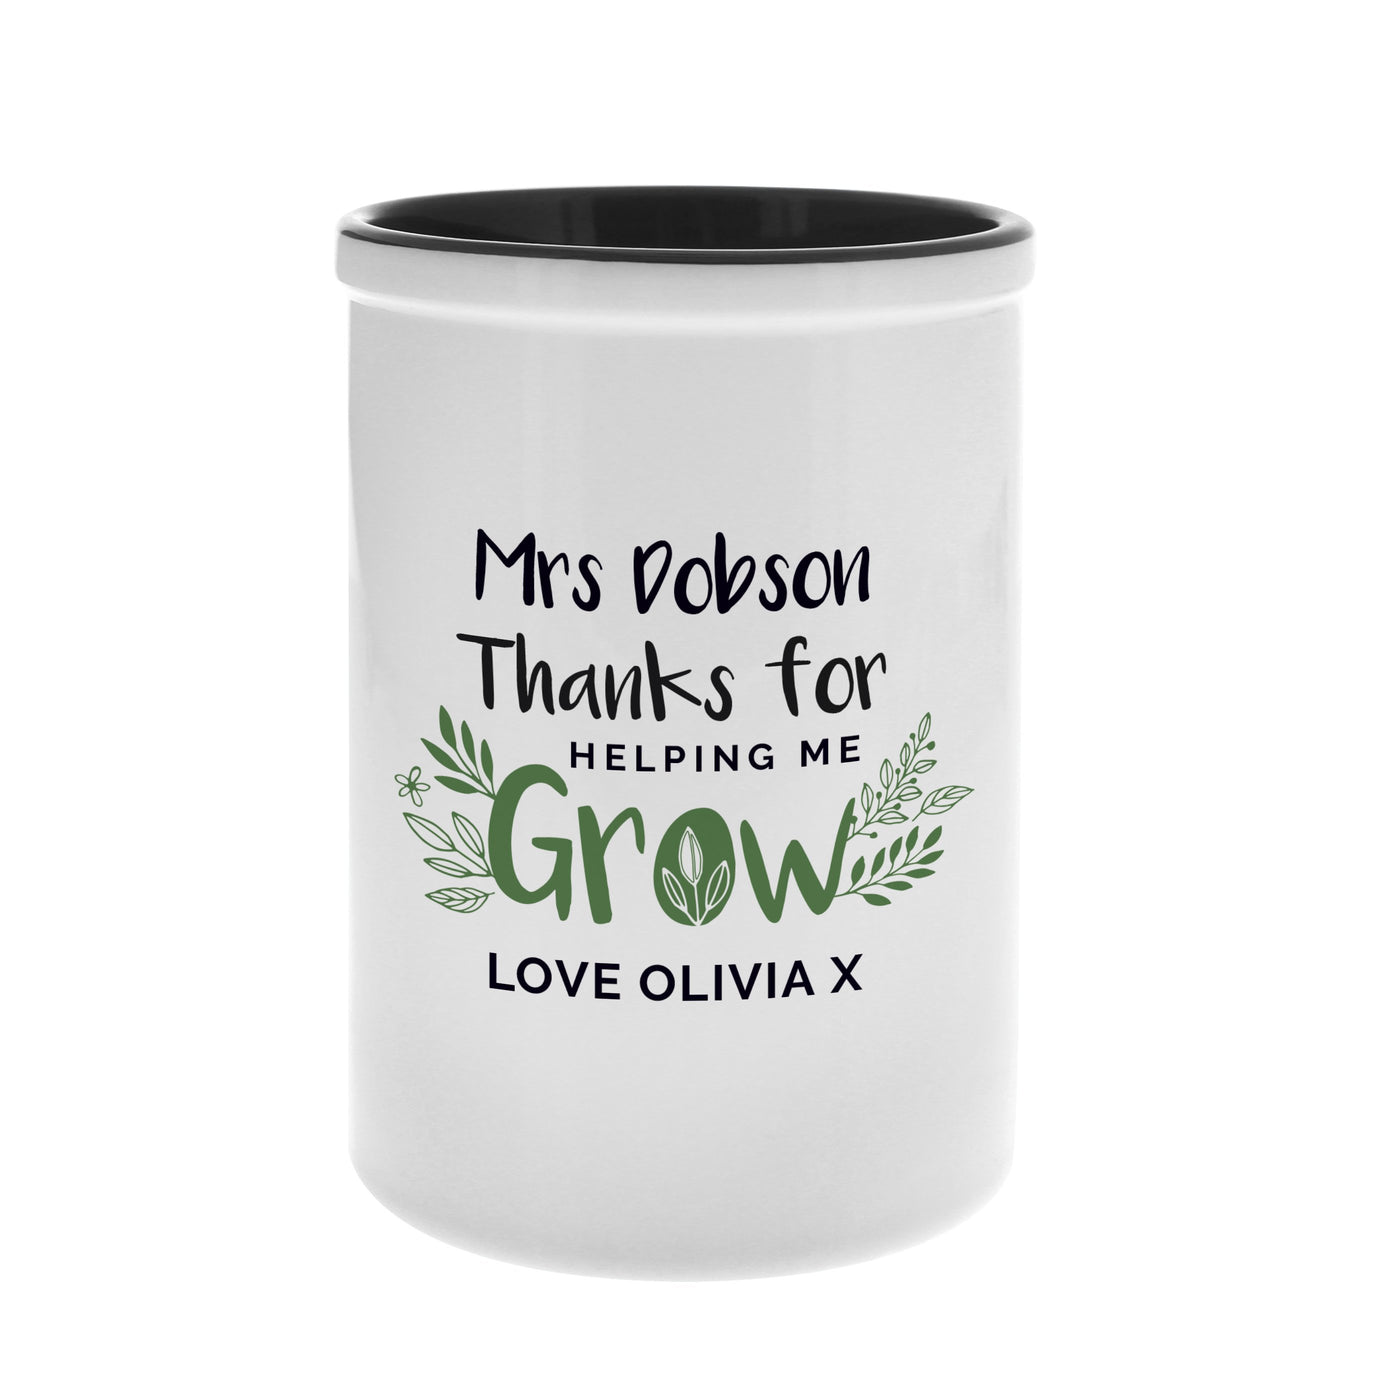 Personalised Thanks For Helping Me Grow Ceramic Stationery Pot - Shop Personalised Gifts